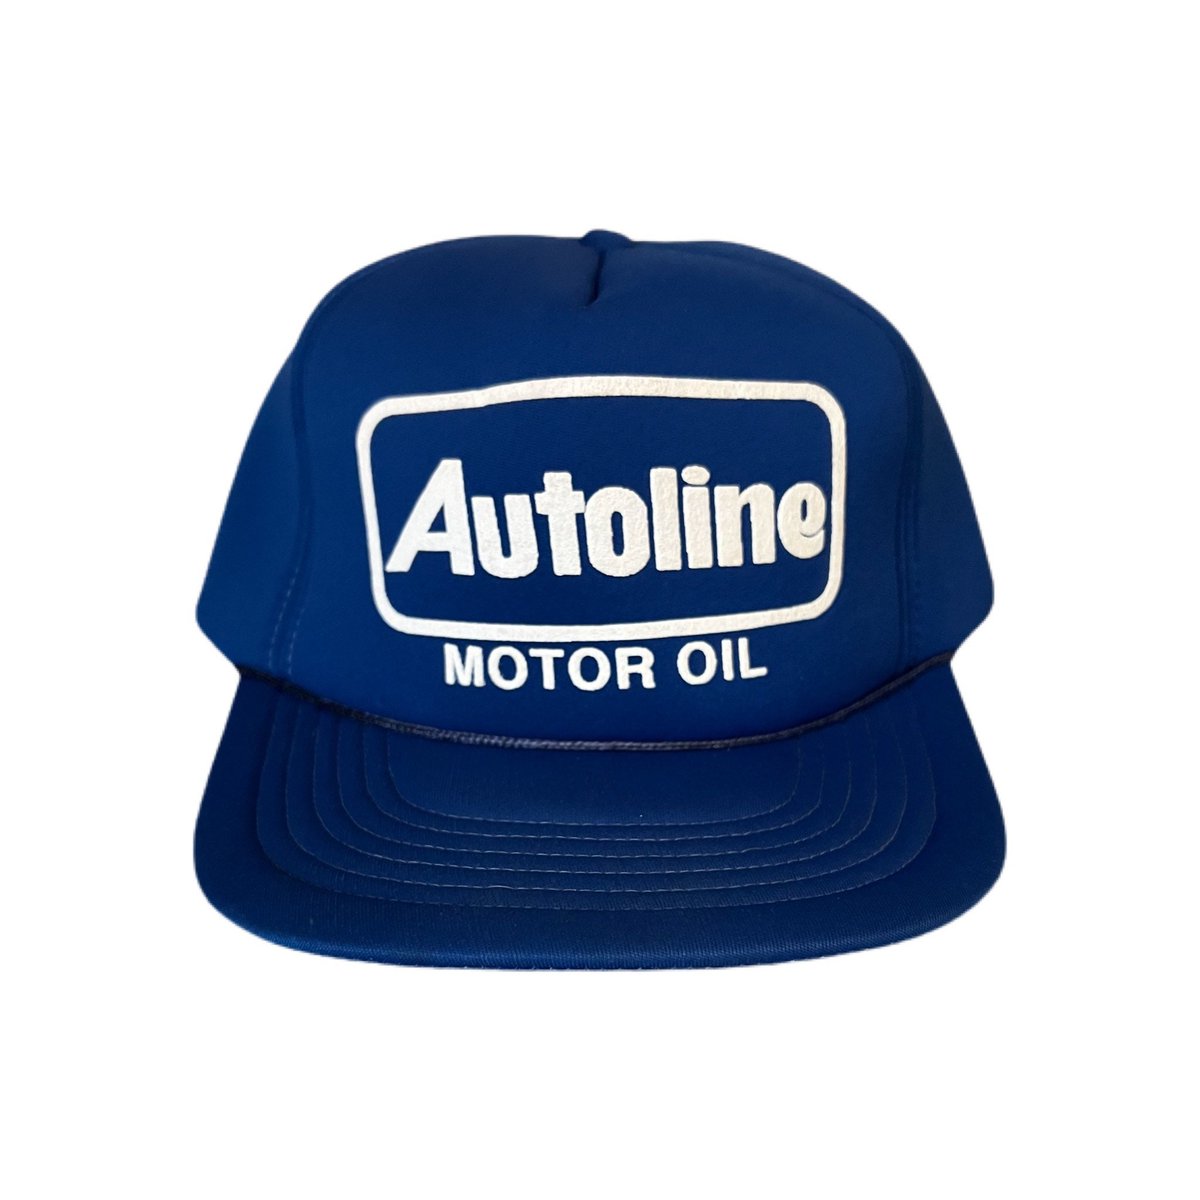 Excited to share the latest addition to my #etsy shop: Vintage Trucker Hat - Autoline Motor Oil - Autoline Hat - Snapback etsy.me/3YMsa3j #truckerhat #retrofitsvintage #buyvintage #autoline #vintagetruckerhat